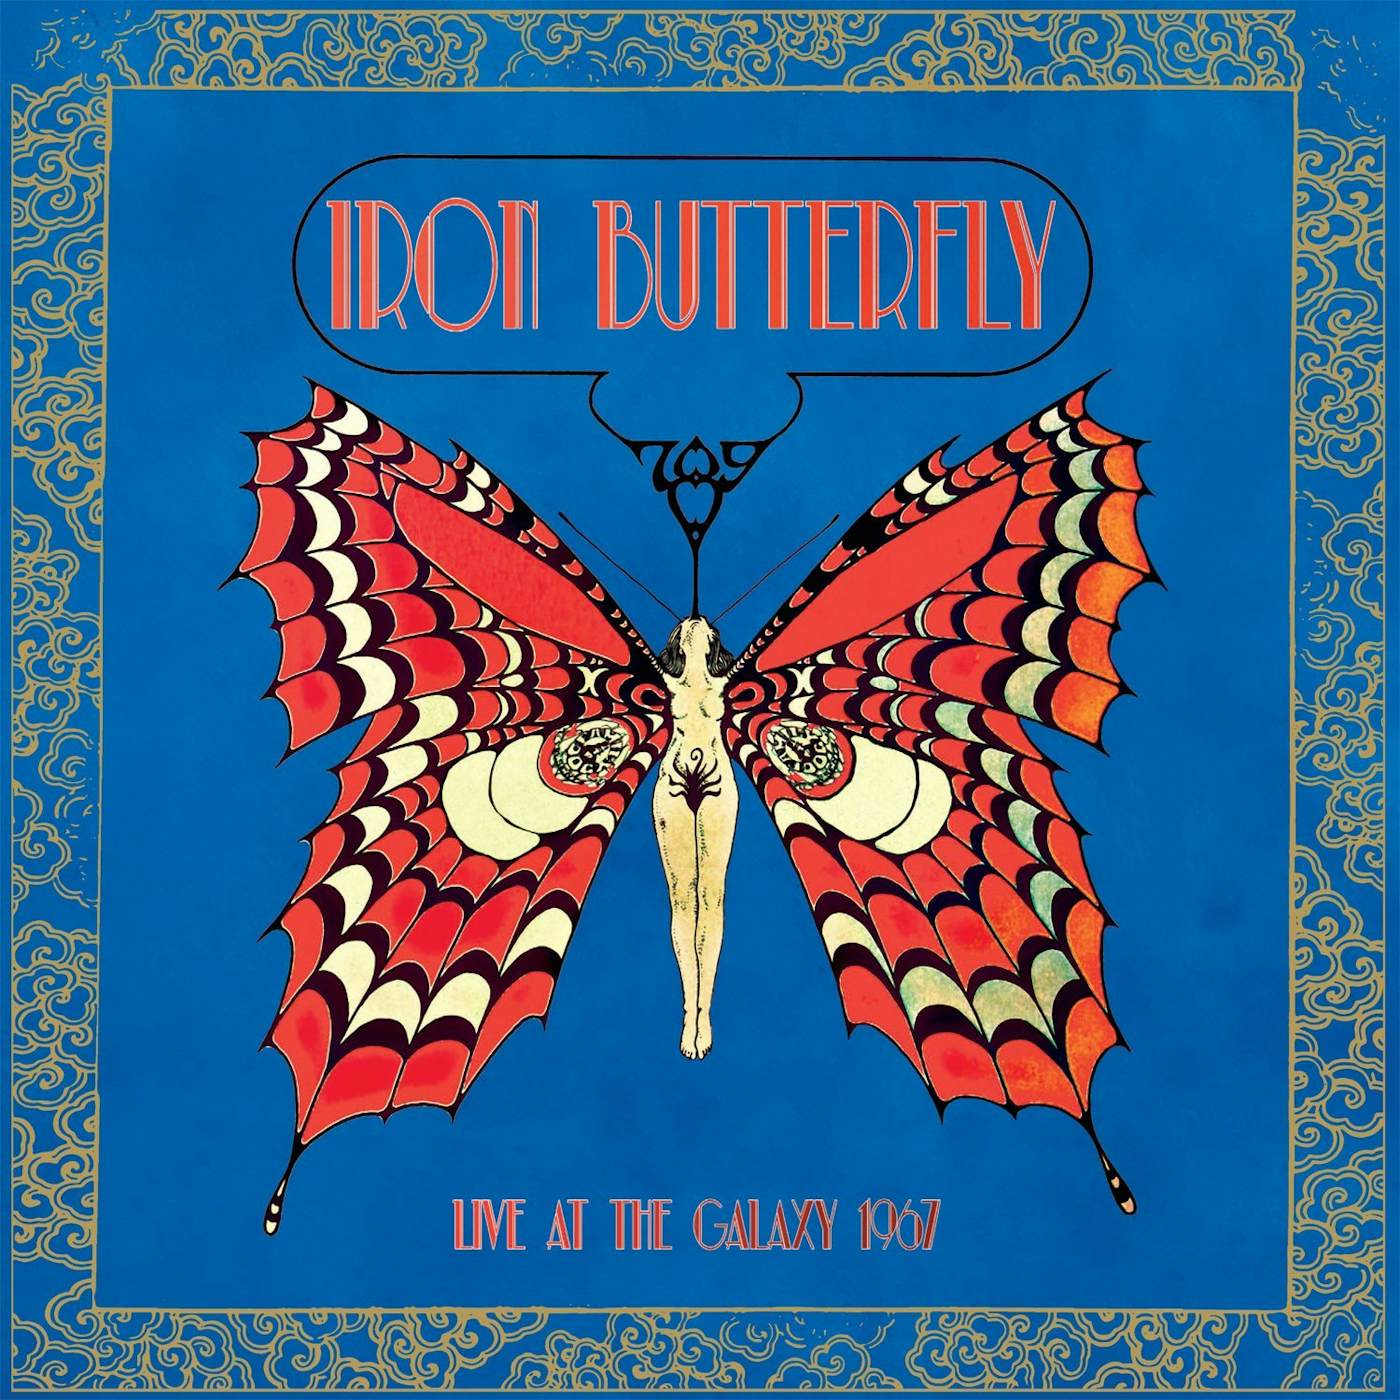 Iron Butterfly Live at the Galaxy 1967 Vinyl Record